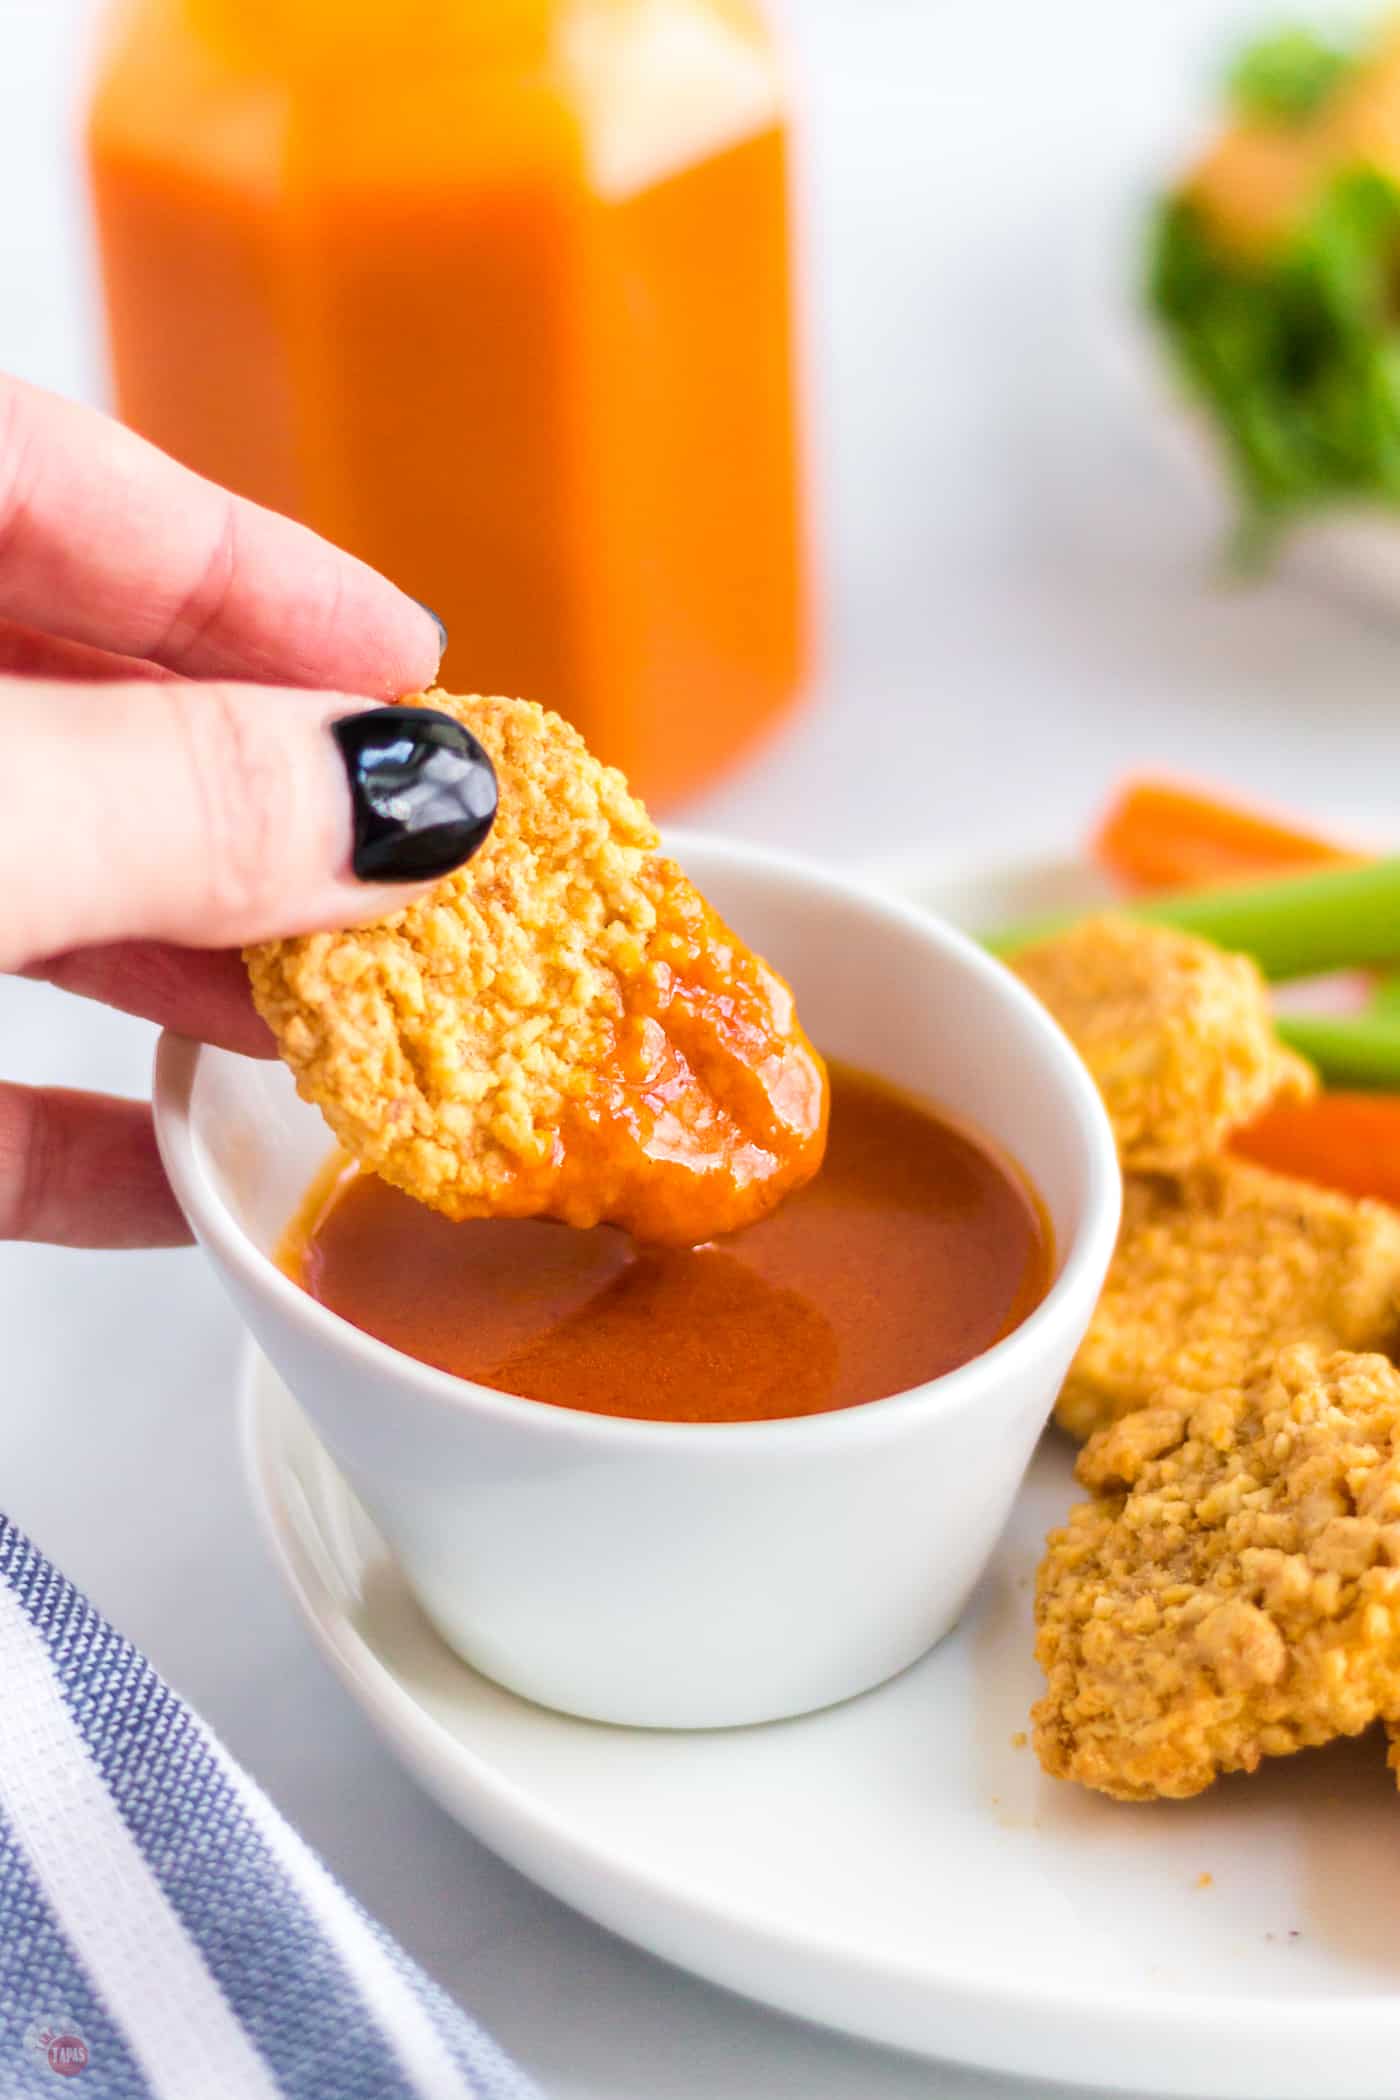 chicken nugget dipping in wing sauce